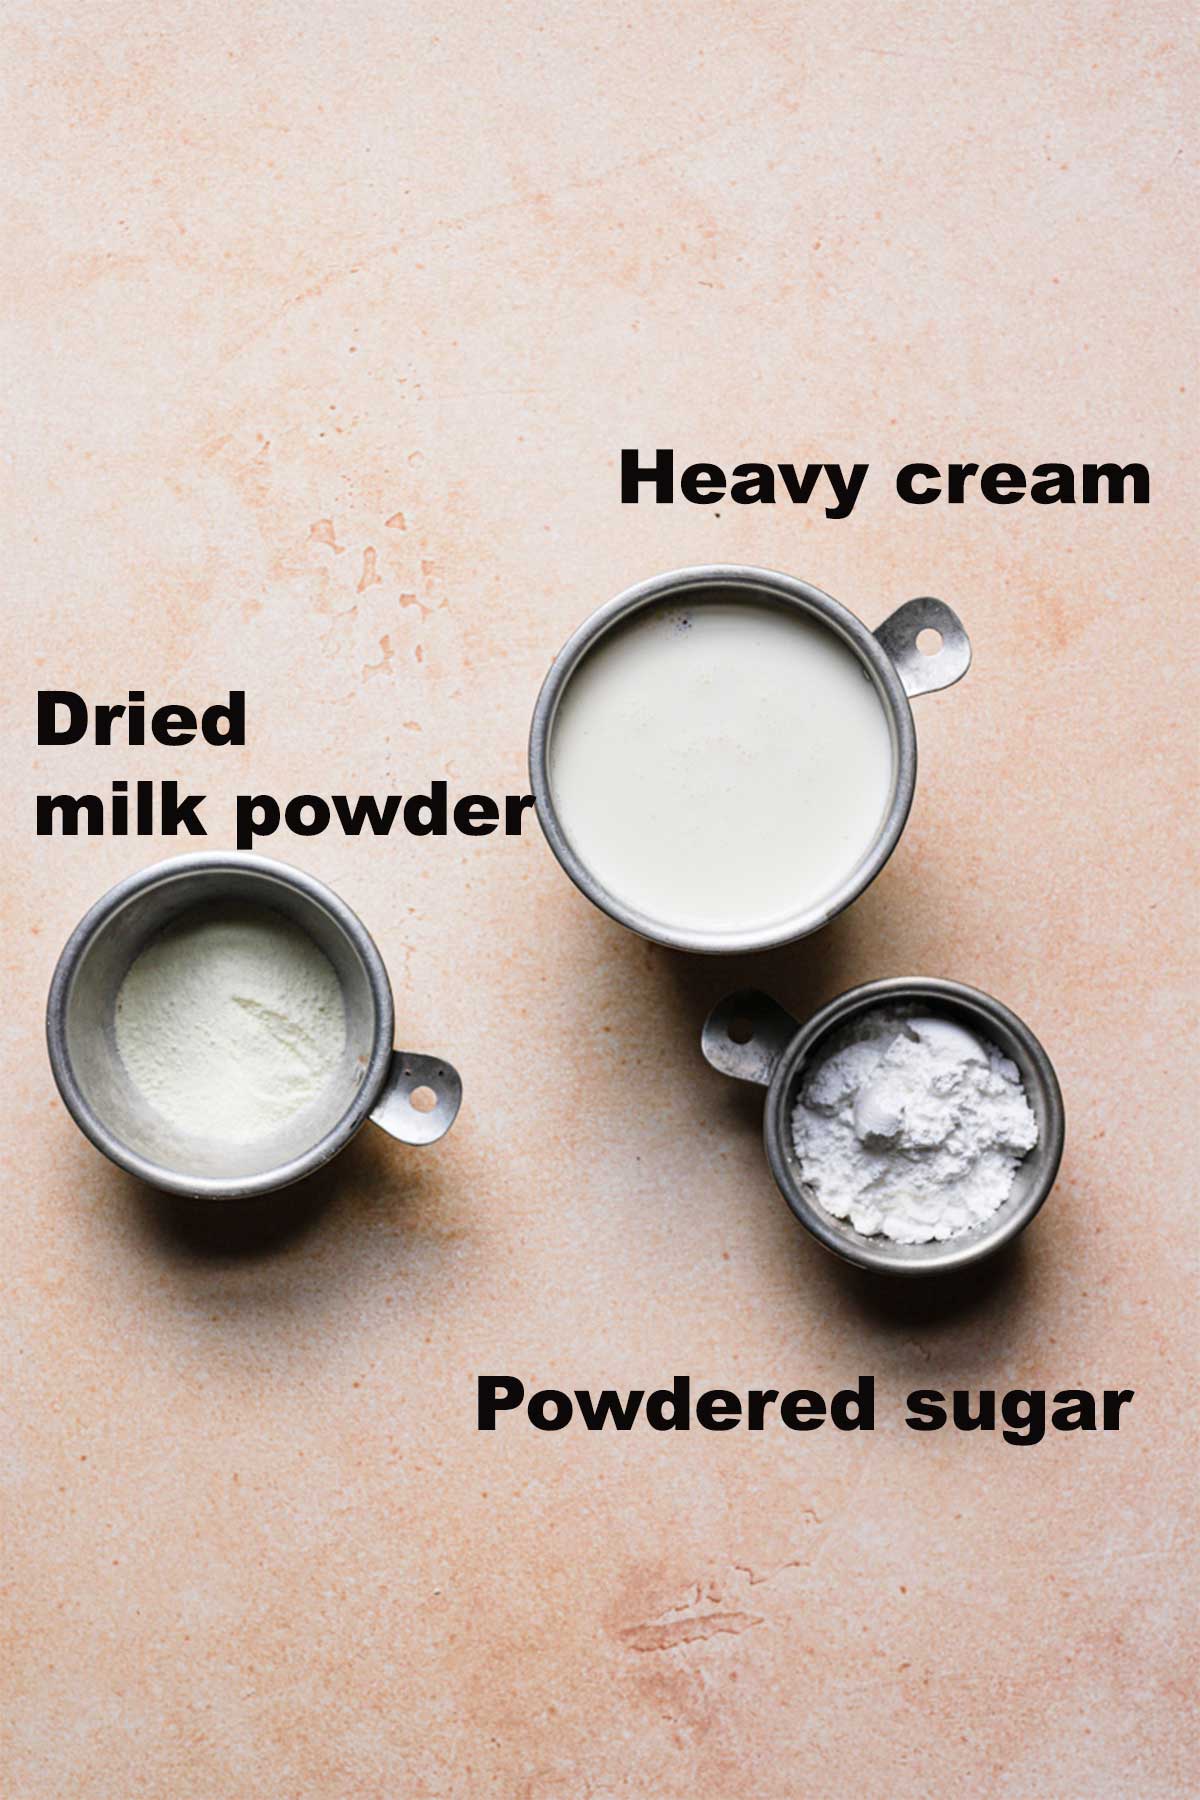 Ingridietns list to for a stabilized heavy cream you can pipe on cupcakes or frost a cake with: dried milk powder, heavy cream and powdered sugar